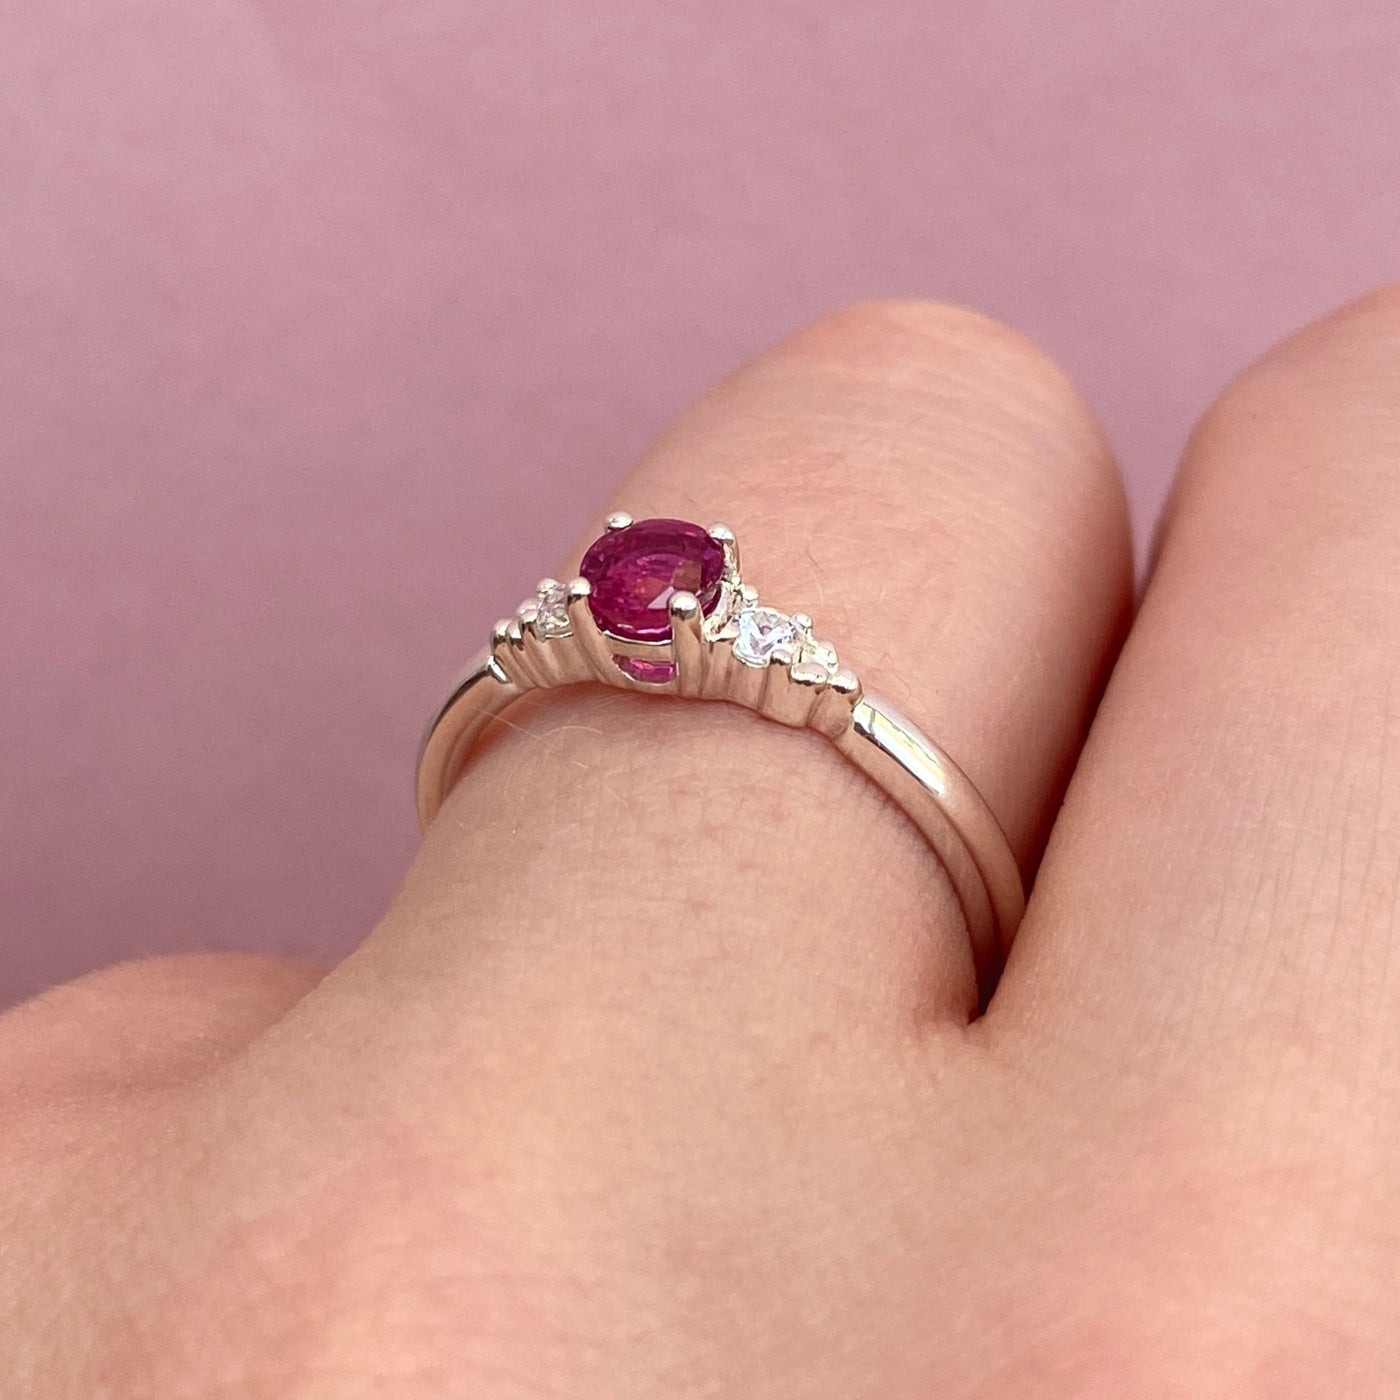 Natalia - Round Brilliant Cut Ruby or Red Tourmaline and Diamond Delicate Trilogy Engagement Ring - Made-to-Order